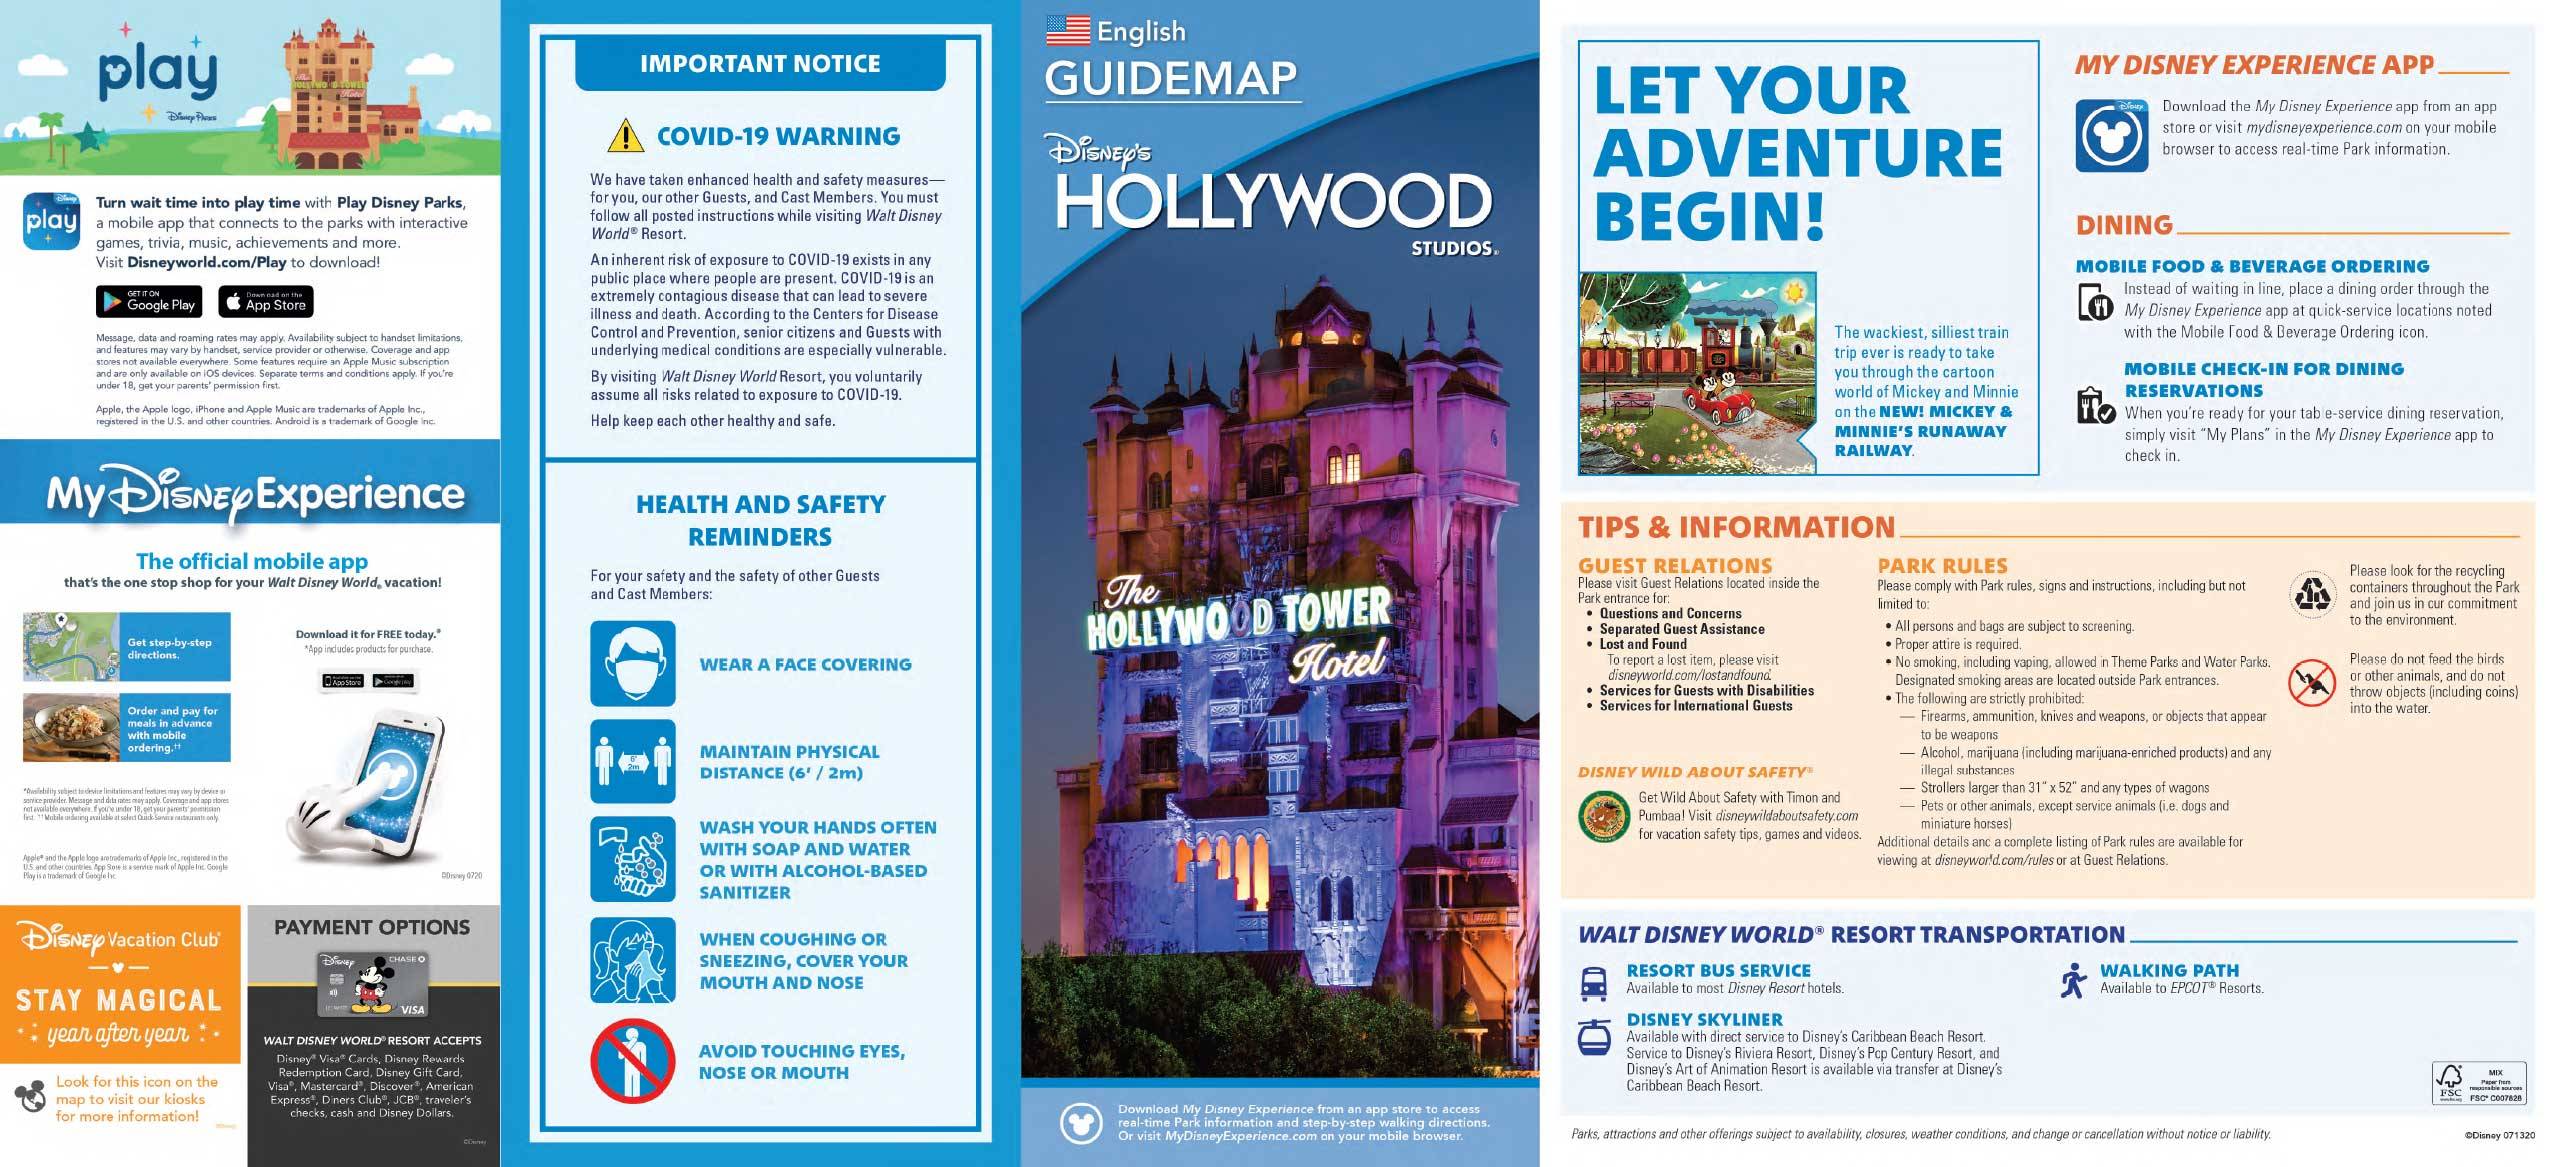 Disney's Hollywood Studios Guide Map July 2020 - Front